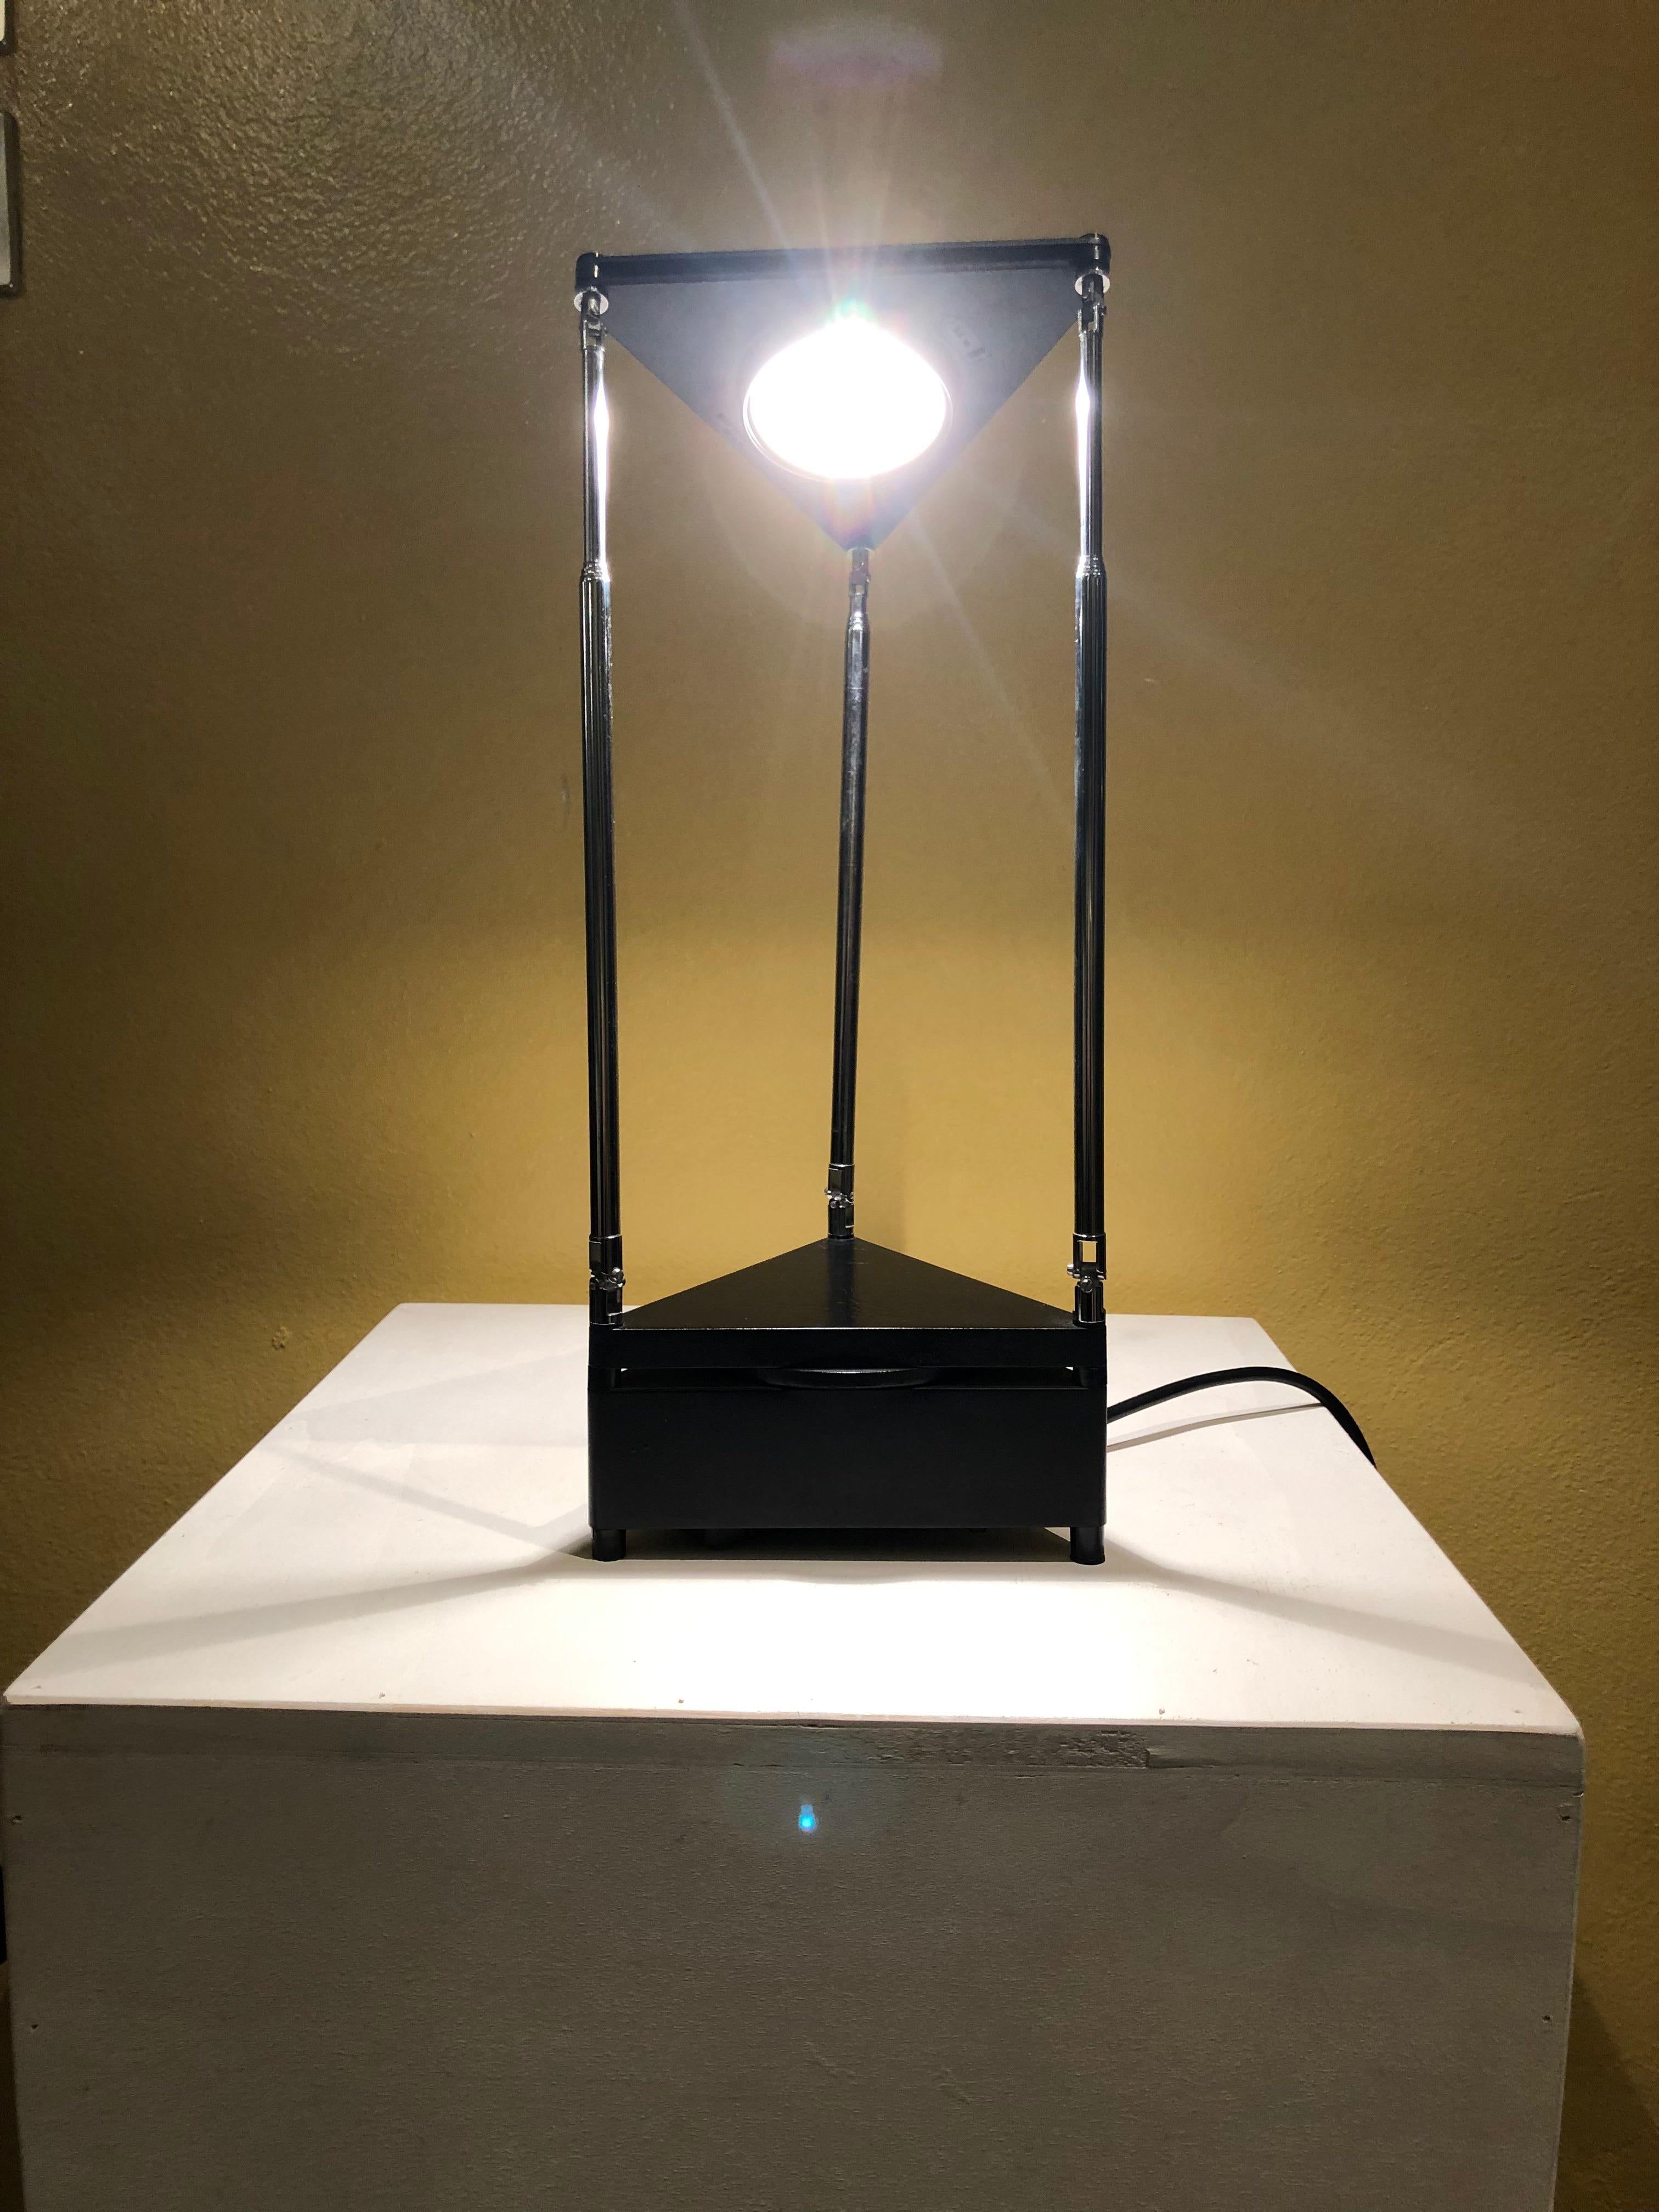 Kandido table lamp was designed by Ferdinand Alexander Porsche in 1983 for Luci Italia. This halogen table lamp has a black-lacquered metal stand and chromed telescopic arms that can move in all directions. It features a moulded black shade, and the